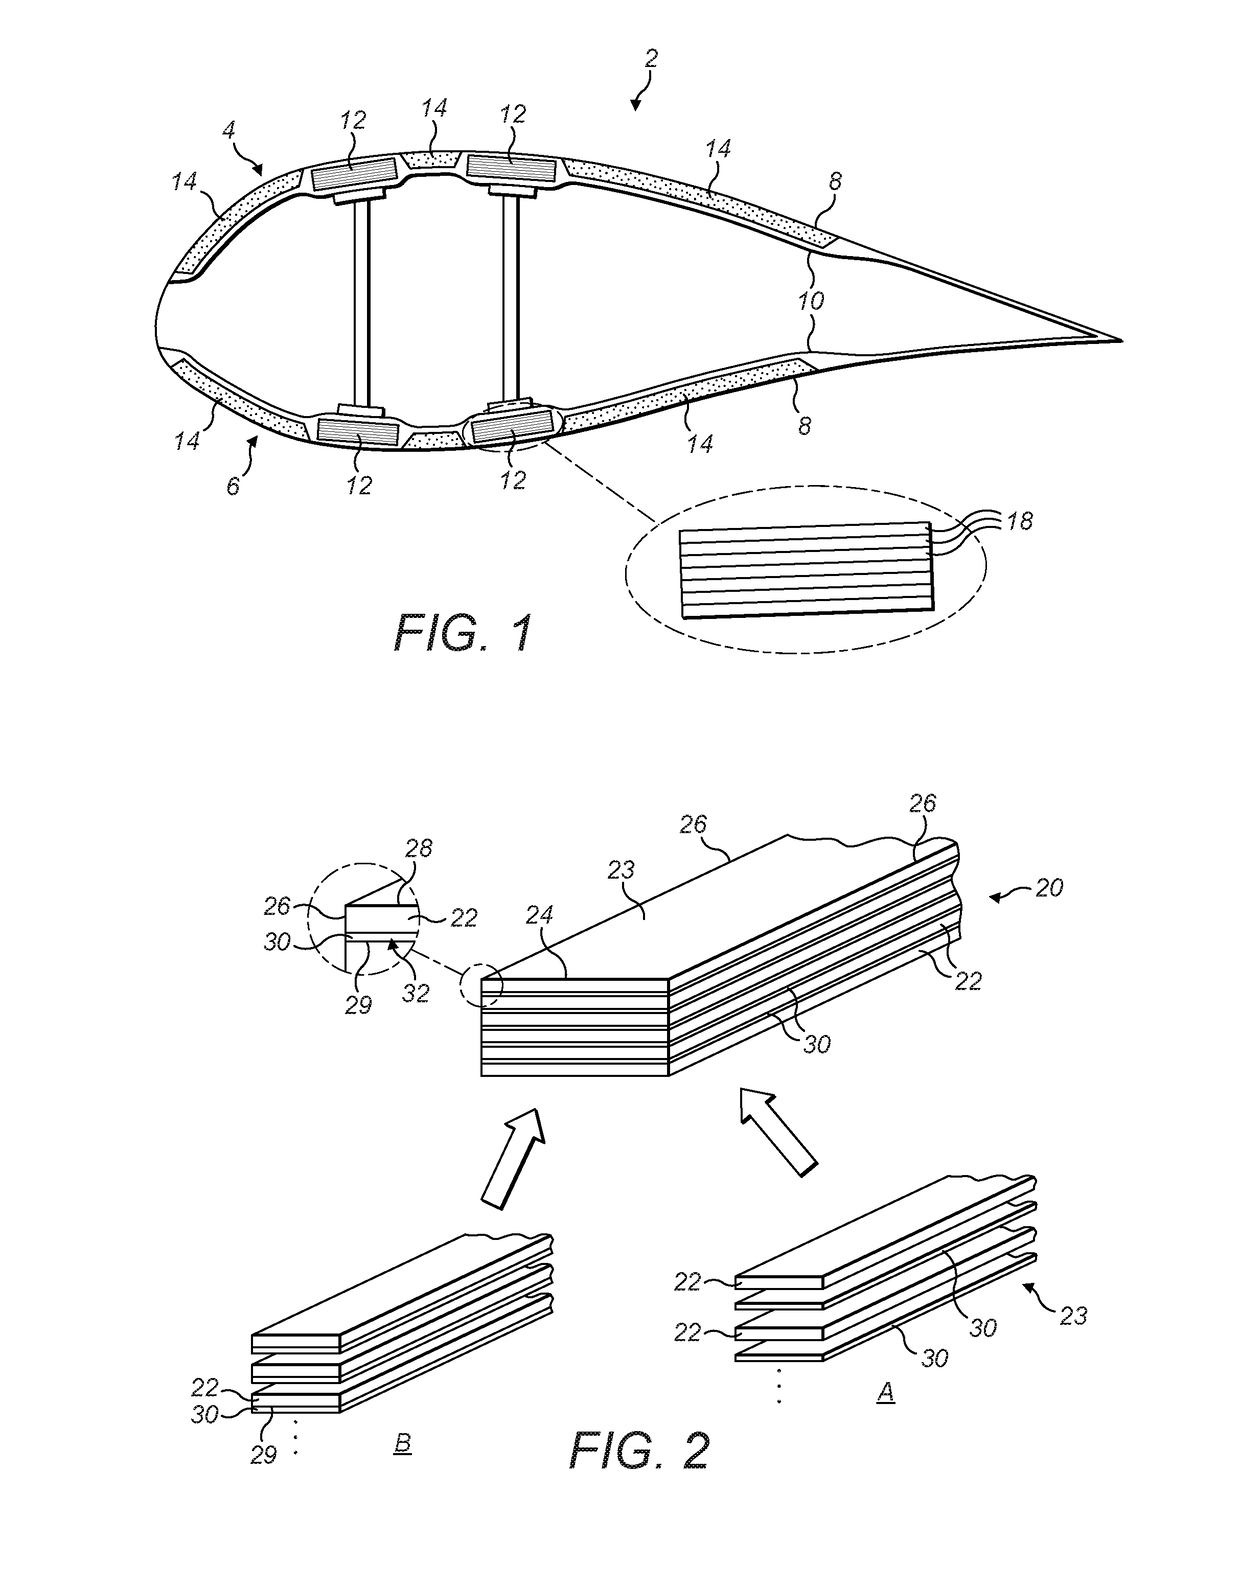 Improvements relating to reinforcing structures for wind turbine blades